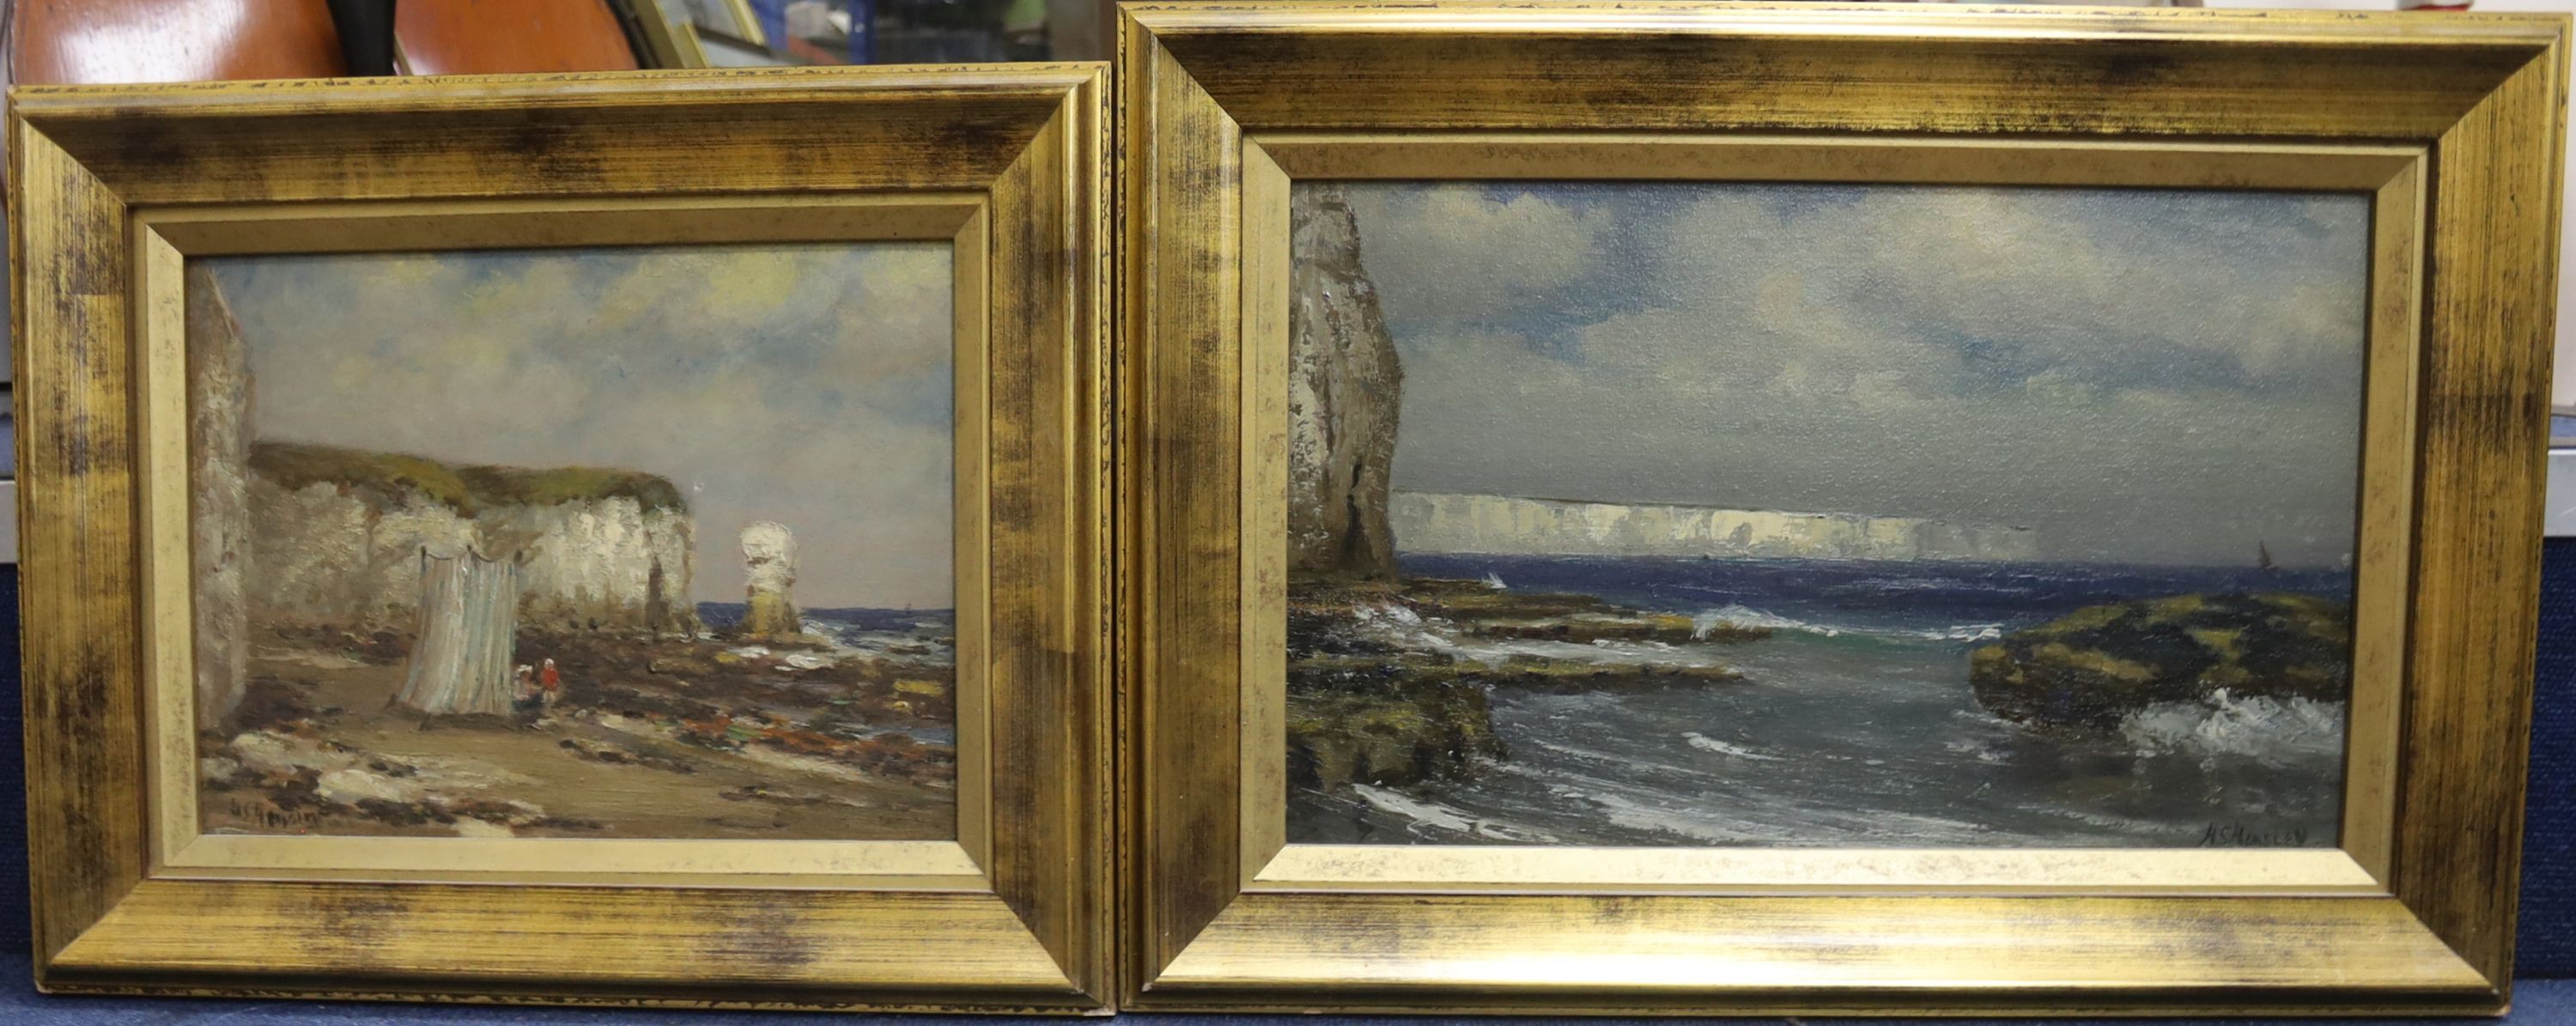 H.S Hemsley, two oils on board, Coastal landscapes, signed, 24 x 39cm and 22 x 29cm